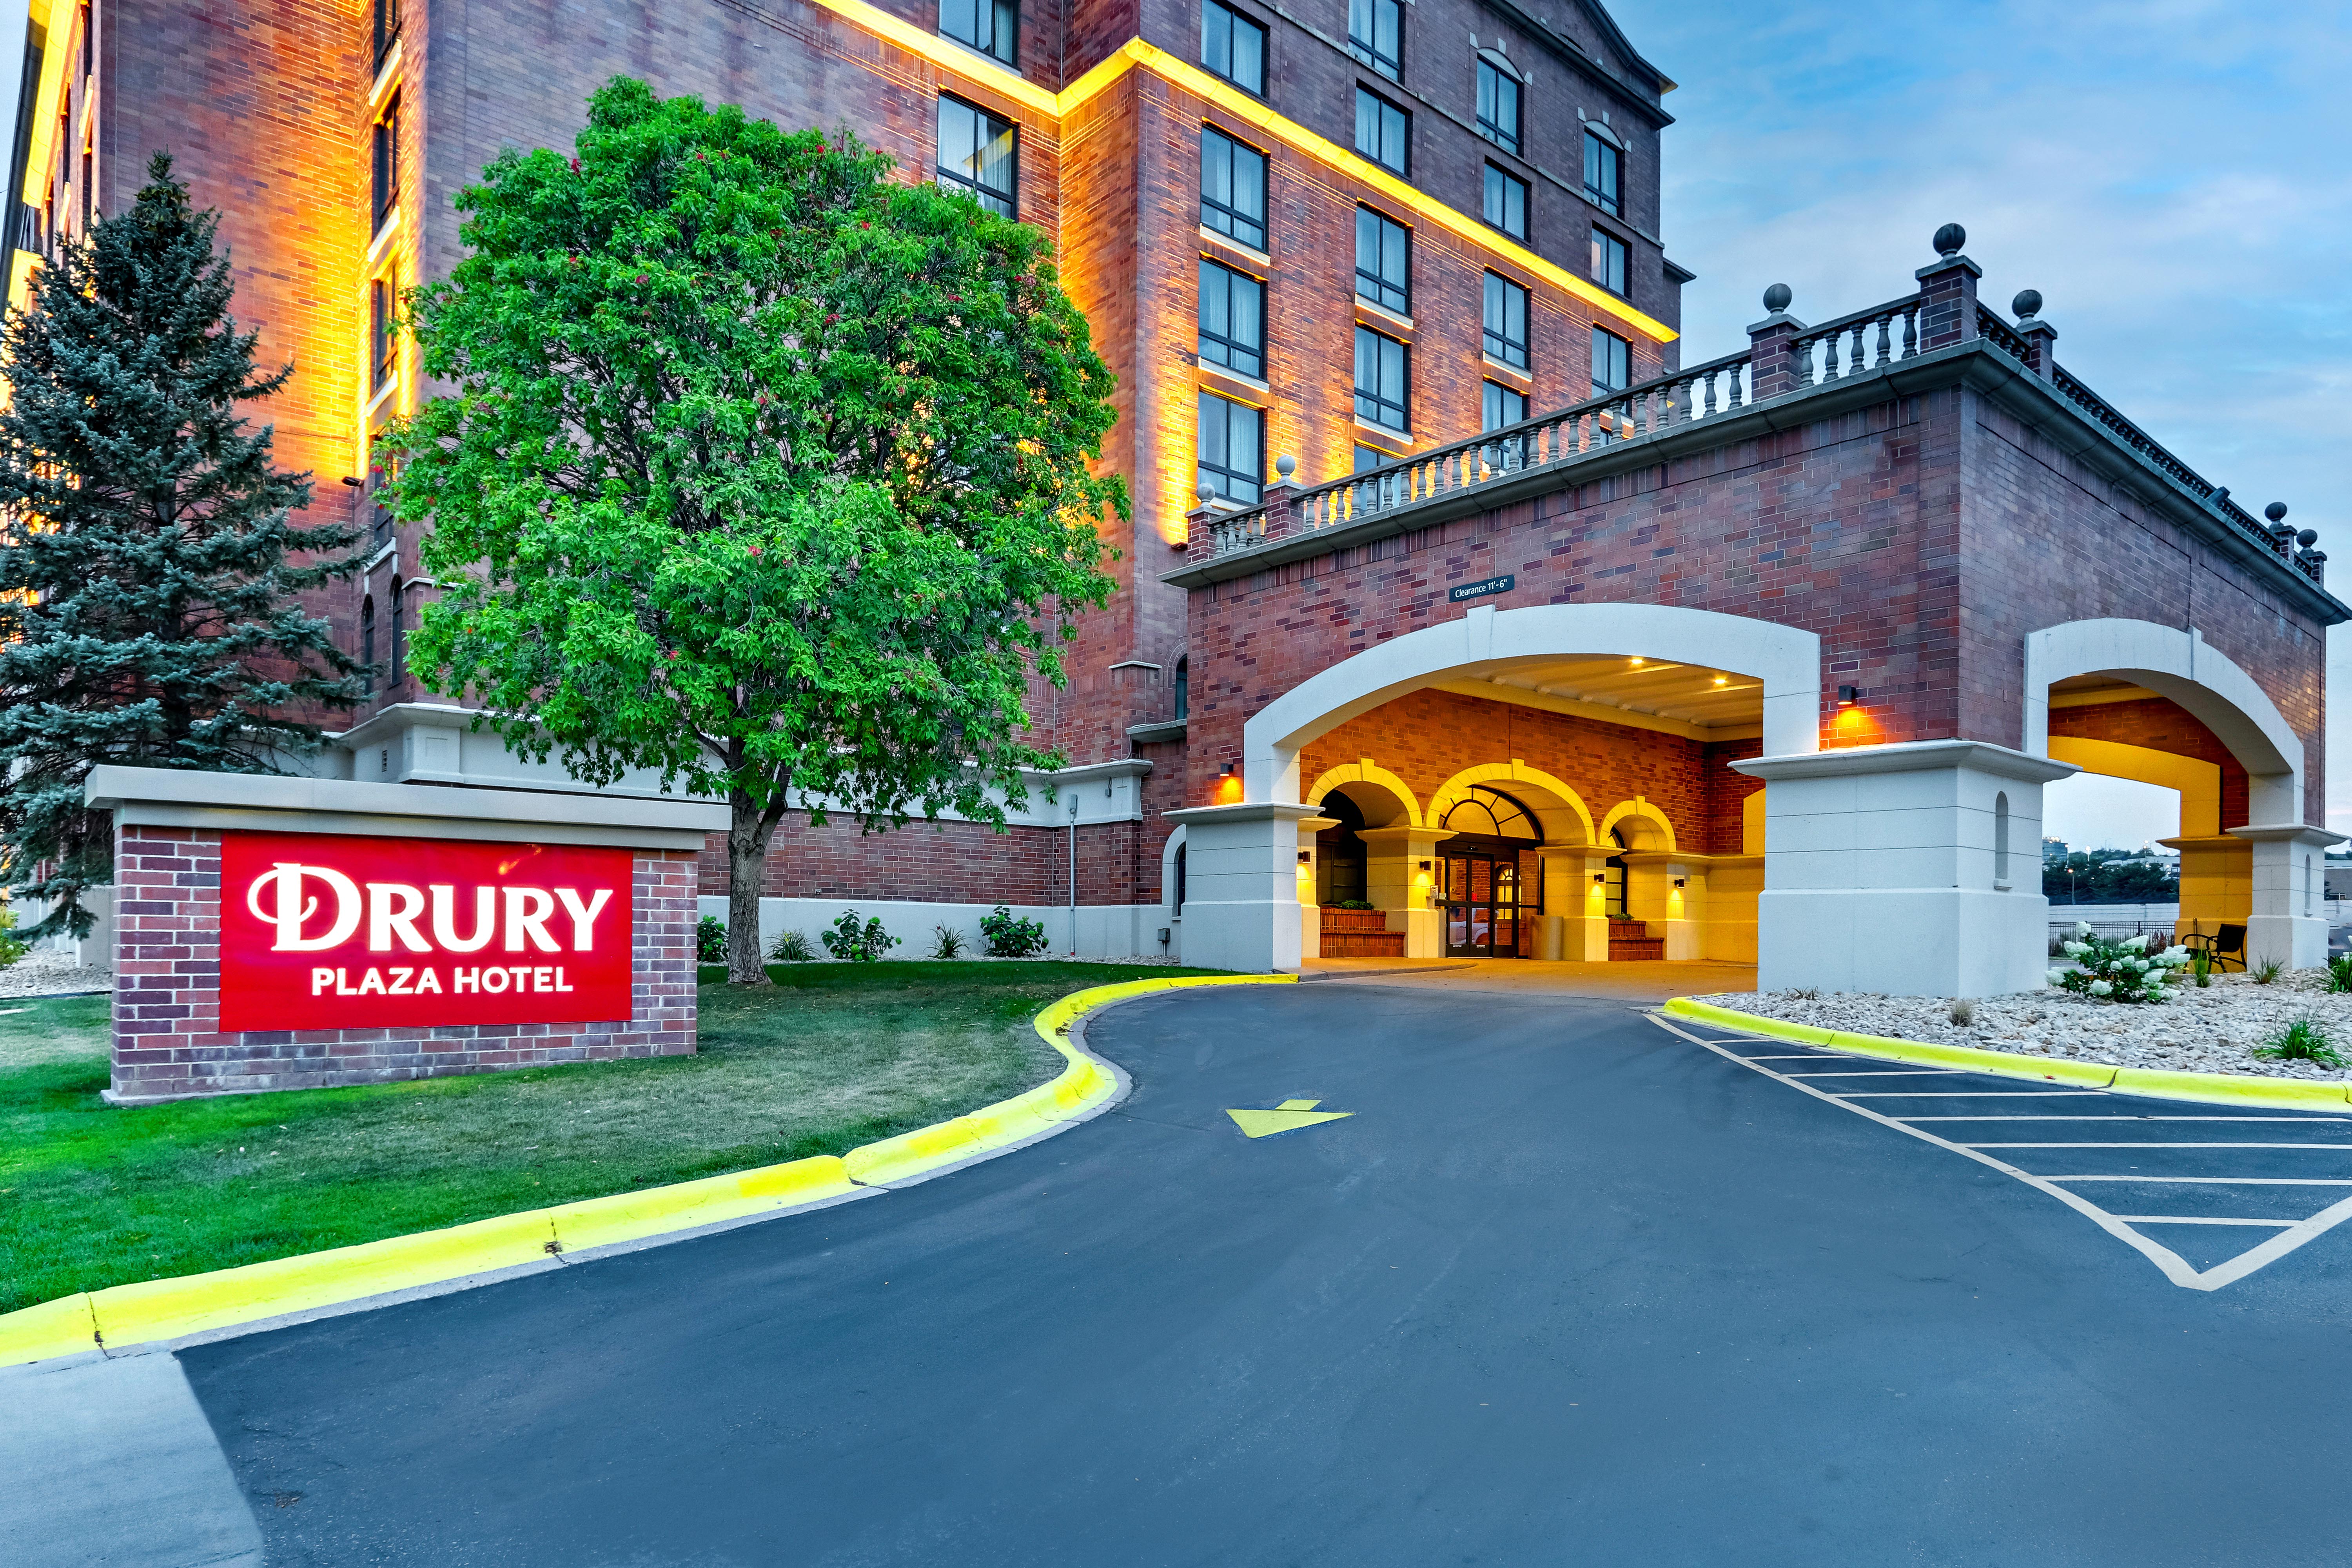 St. Paul Embassy Suites hotel to close in January, rebrand Drury